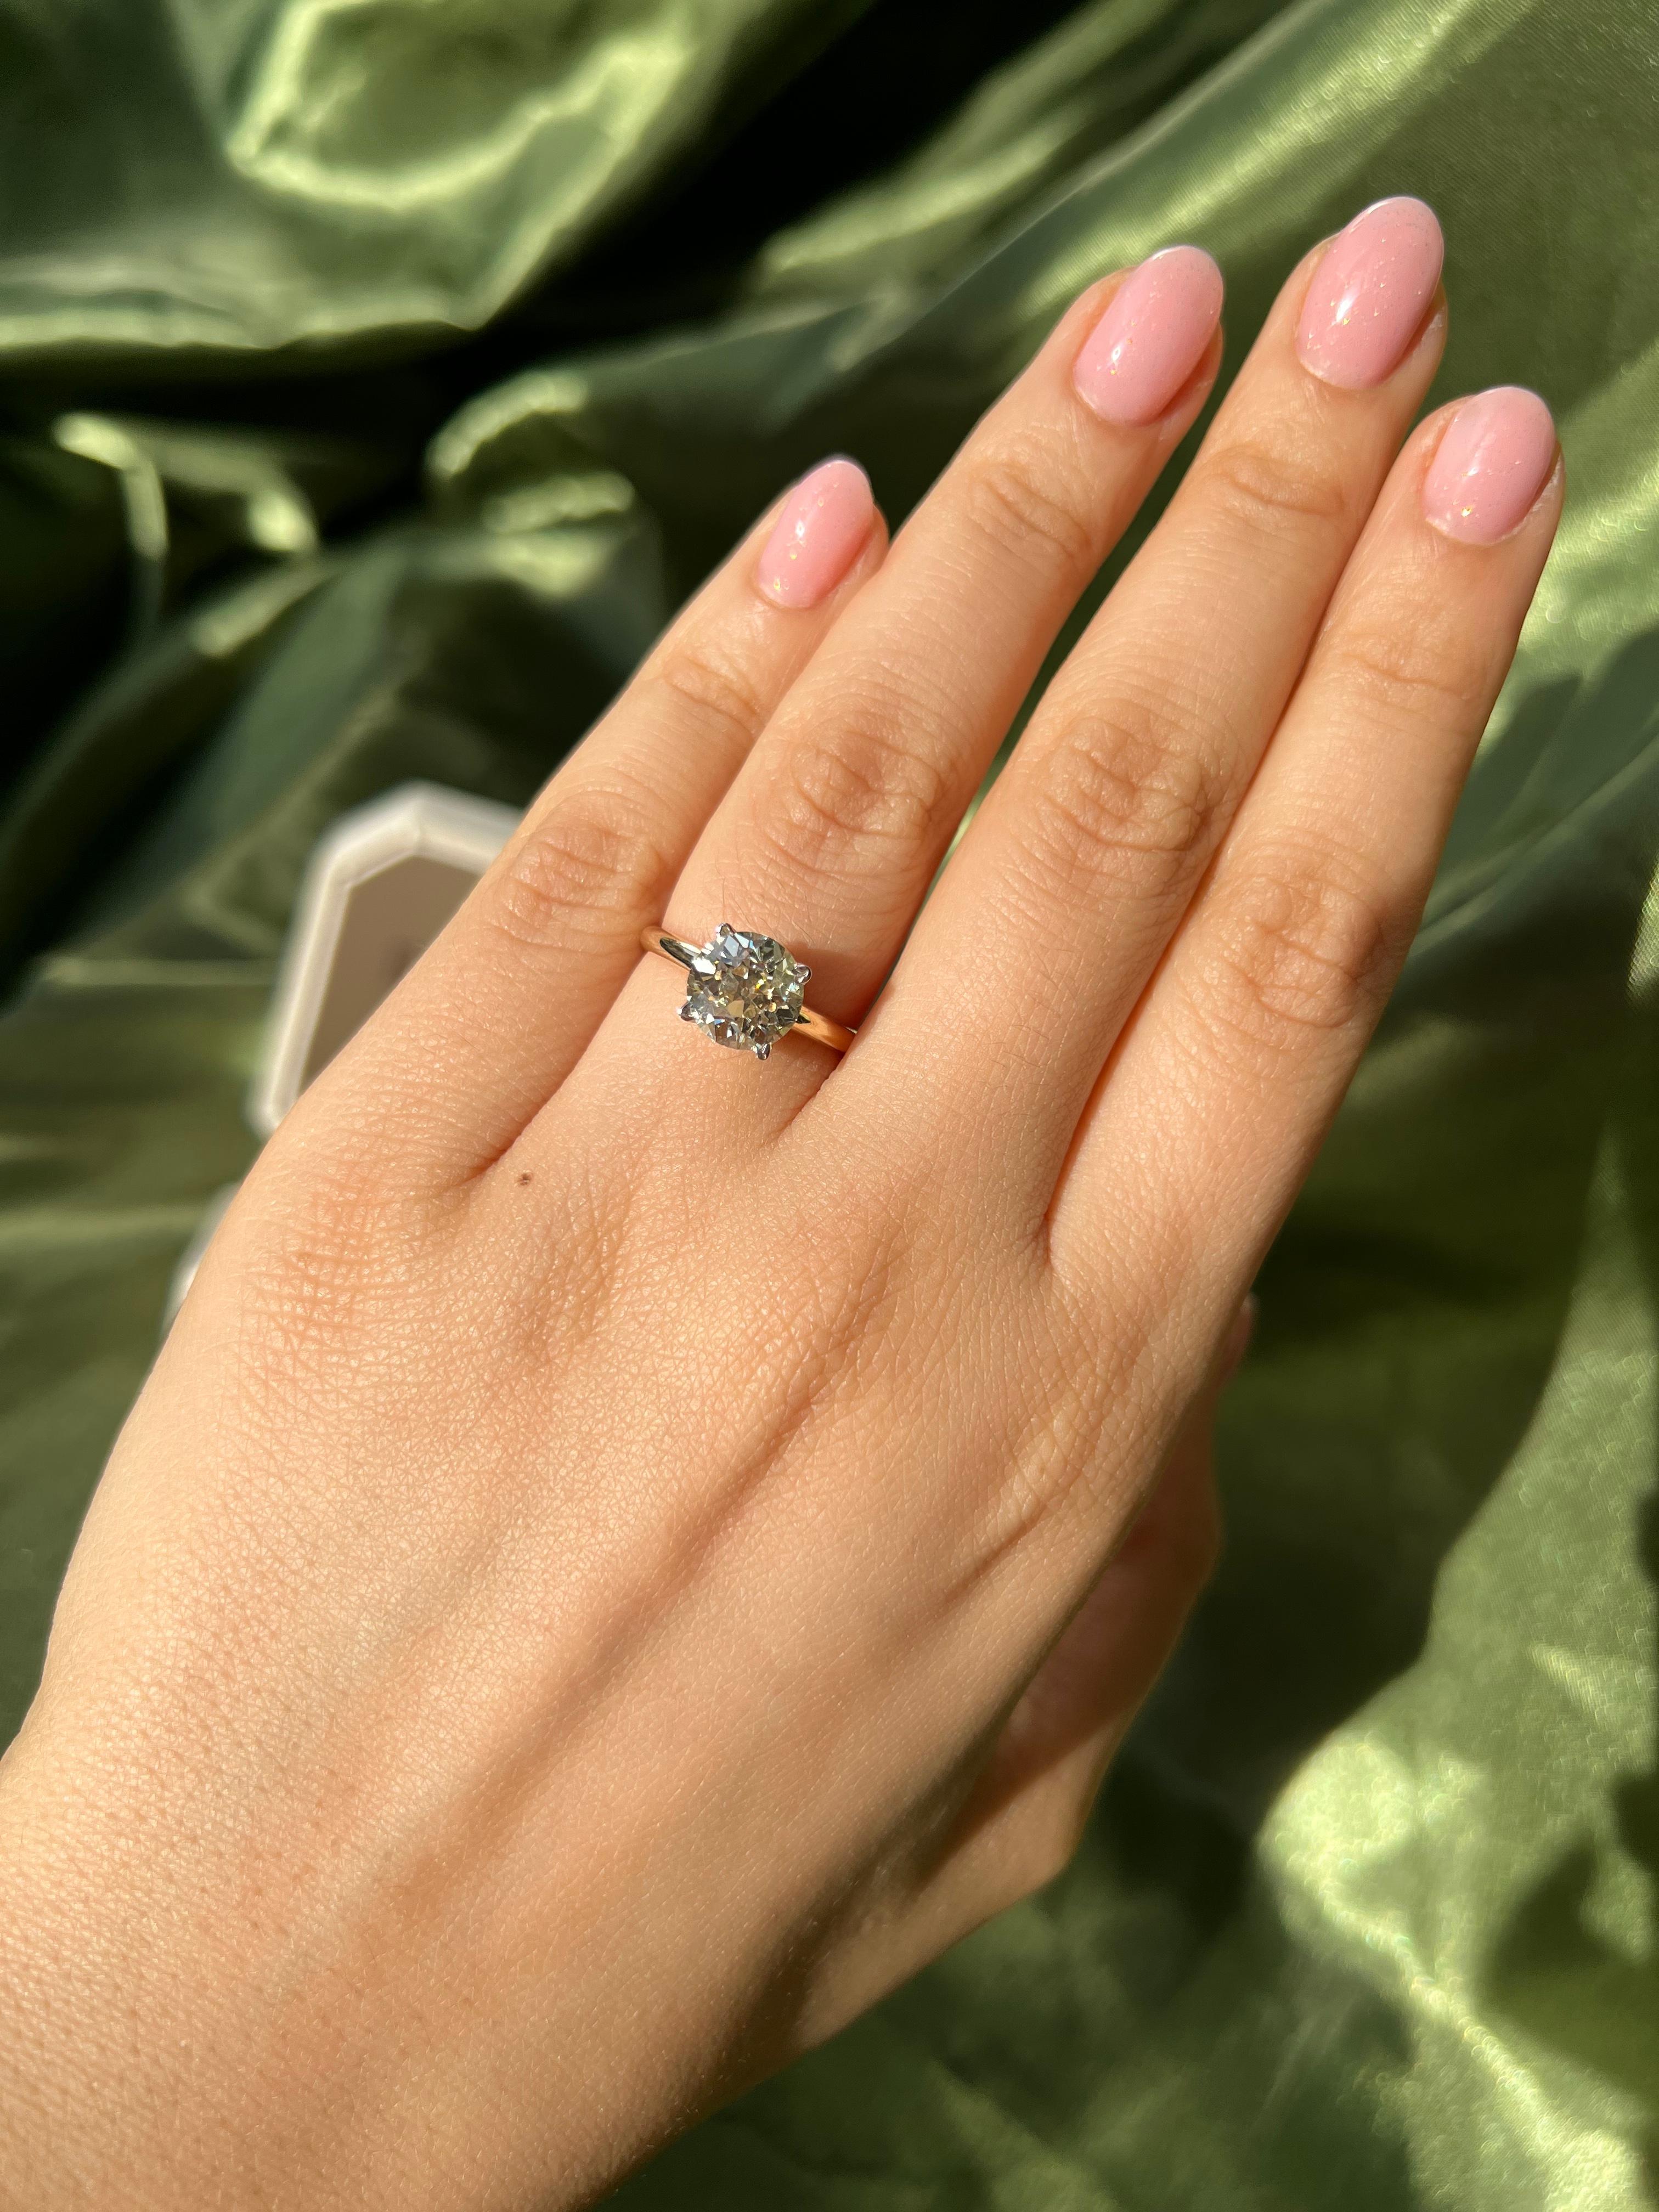 It doesn't get more timeless than this, an elegant diamond on an effortless setting. The center is an incredibly bright 2.65 carat GIA certified old Euro with a beautiful facet pattern and oh-so much sparkle. We love a barely-there four prong looks